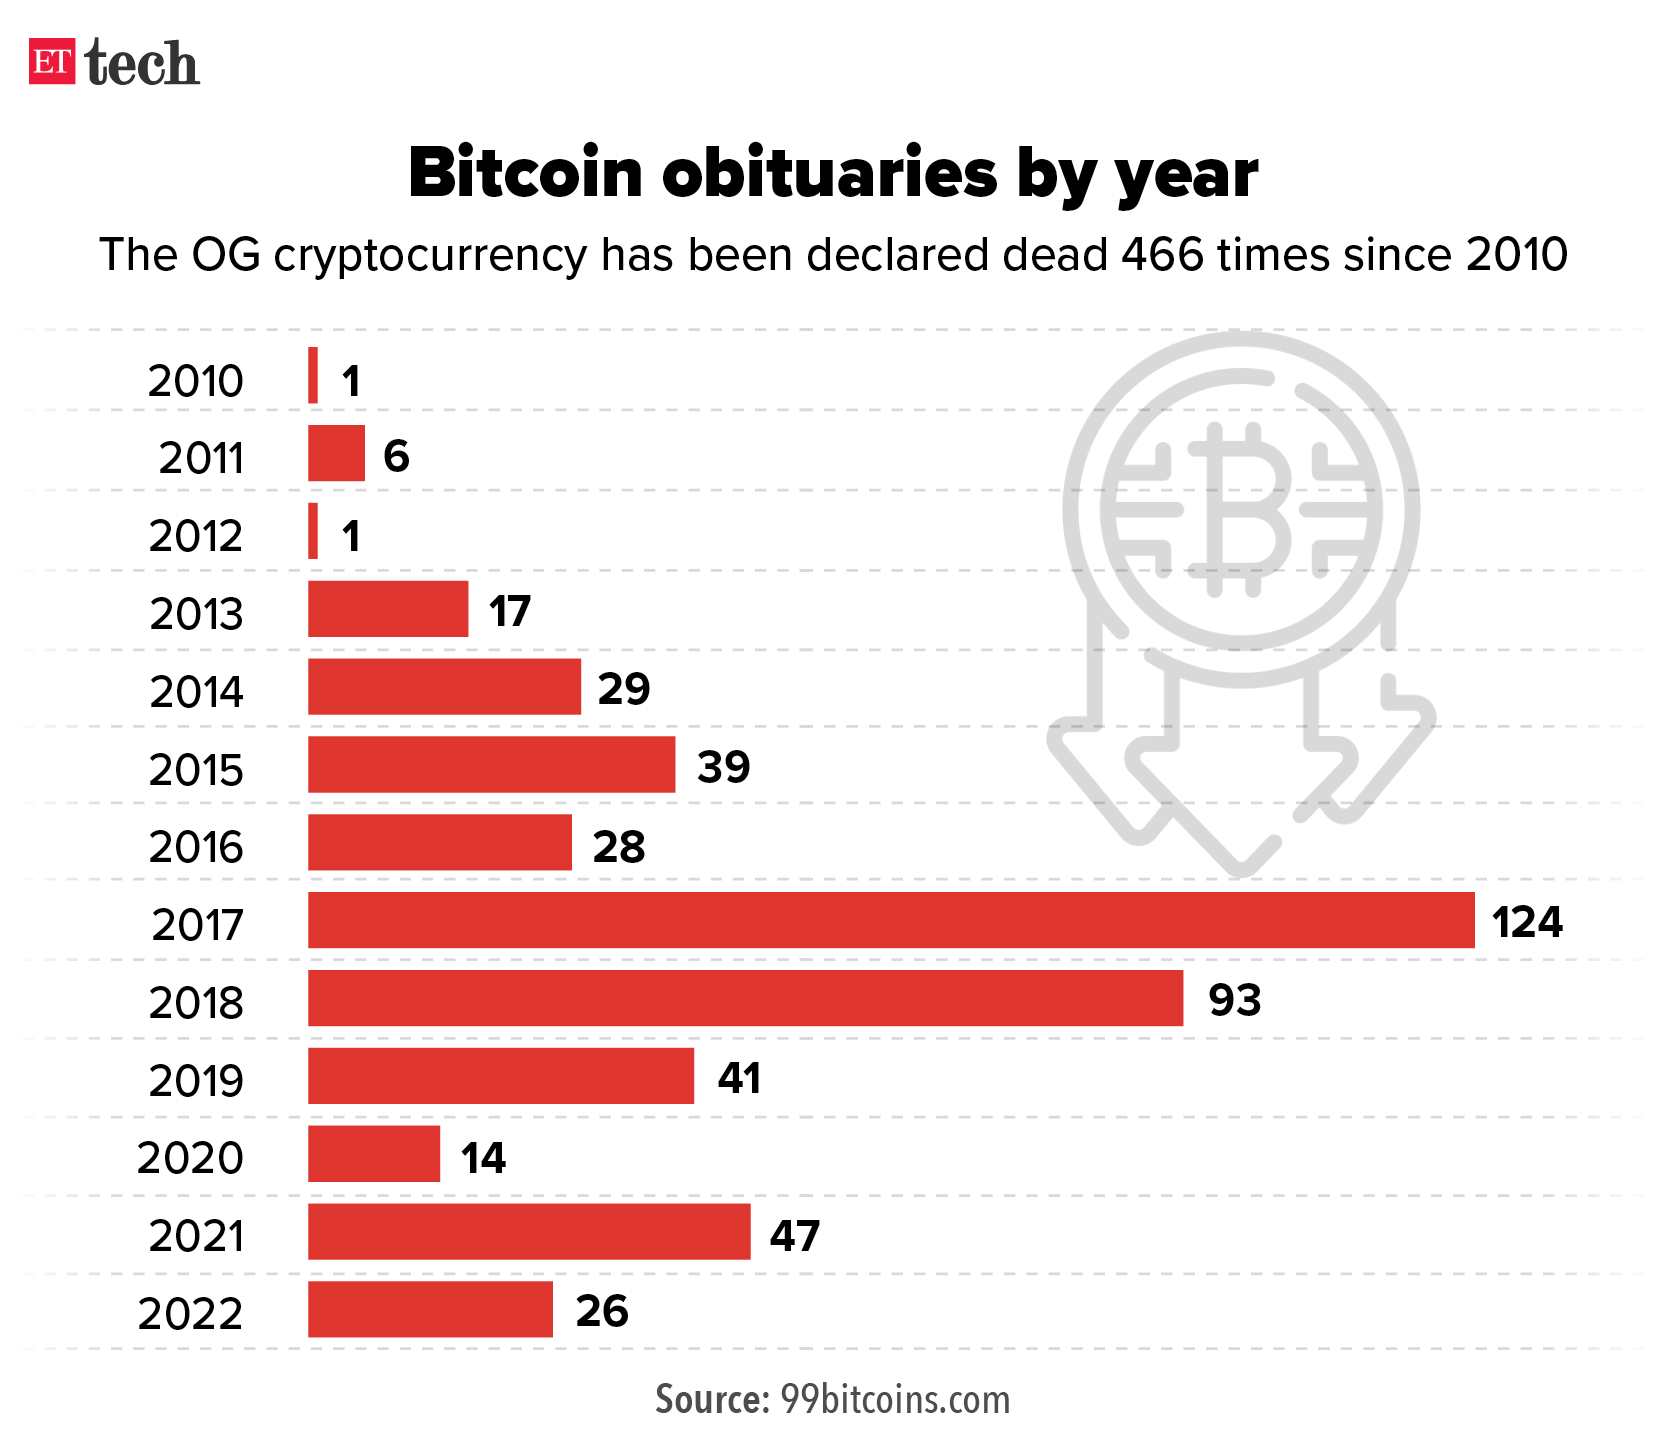 Bitcoin obituaries by year